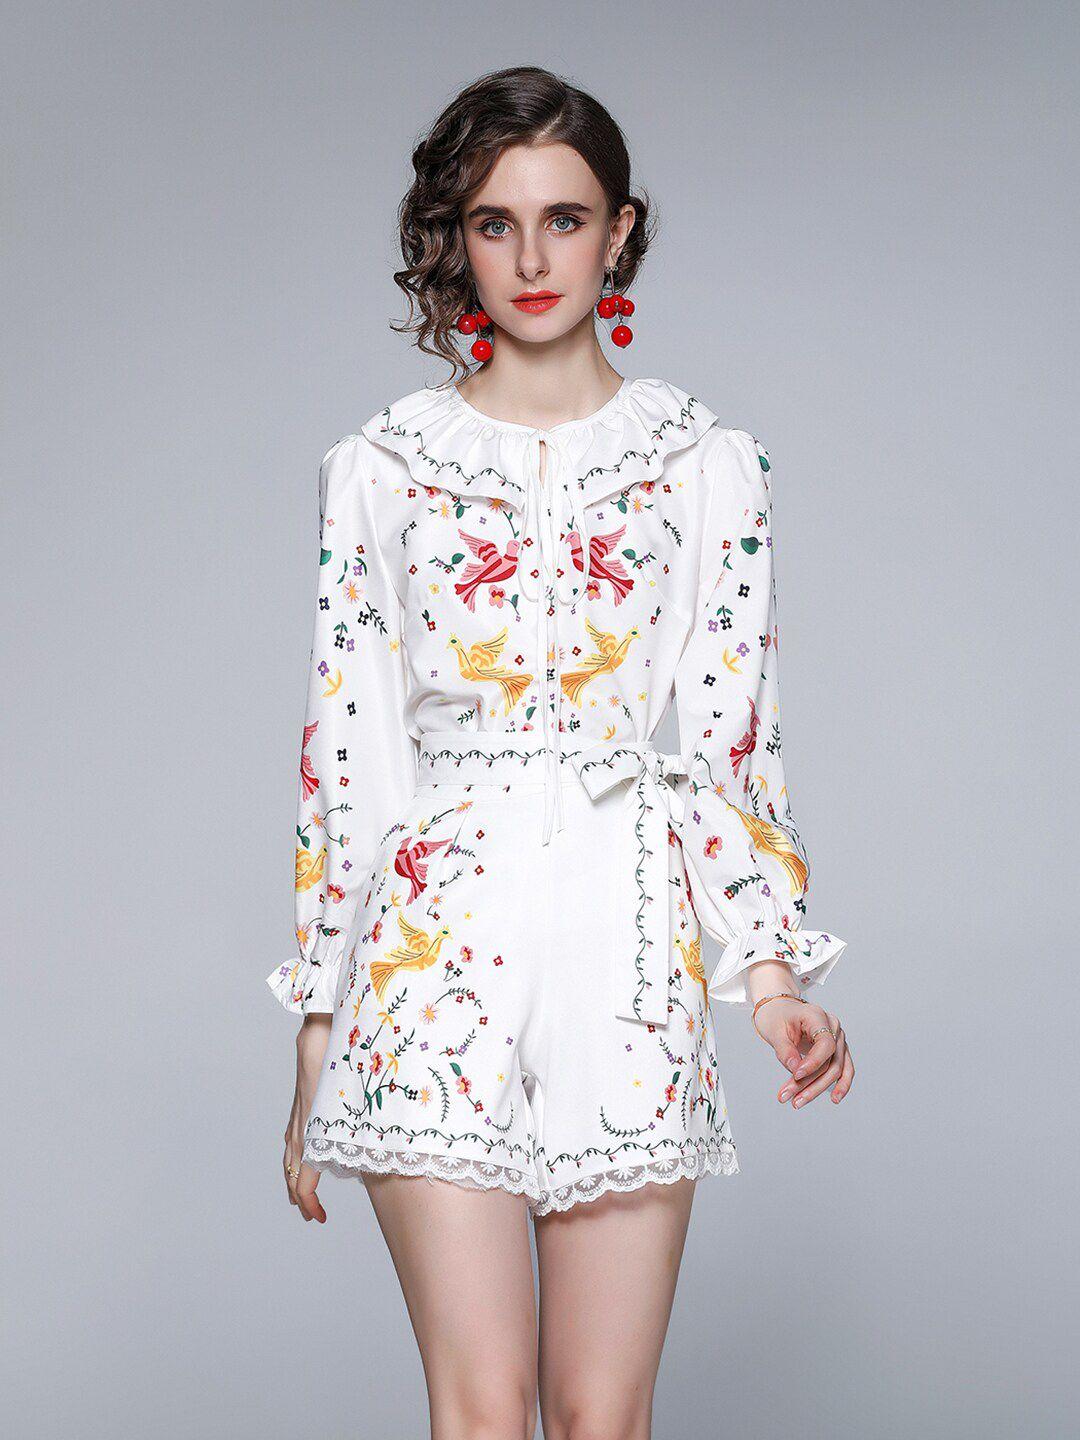 jc collection women white printed top with short co-ords set